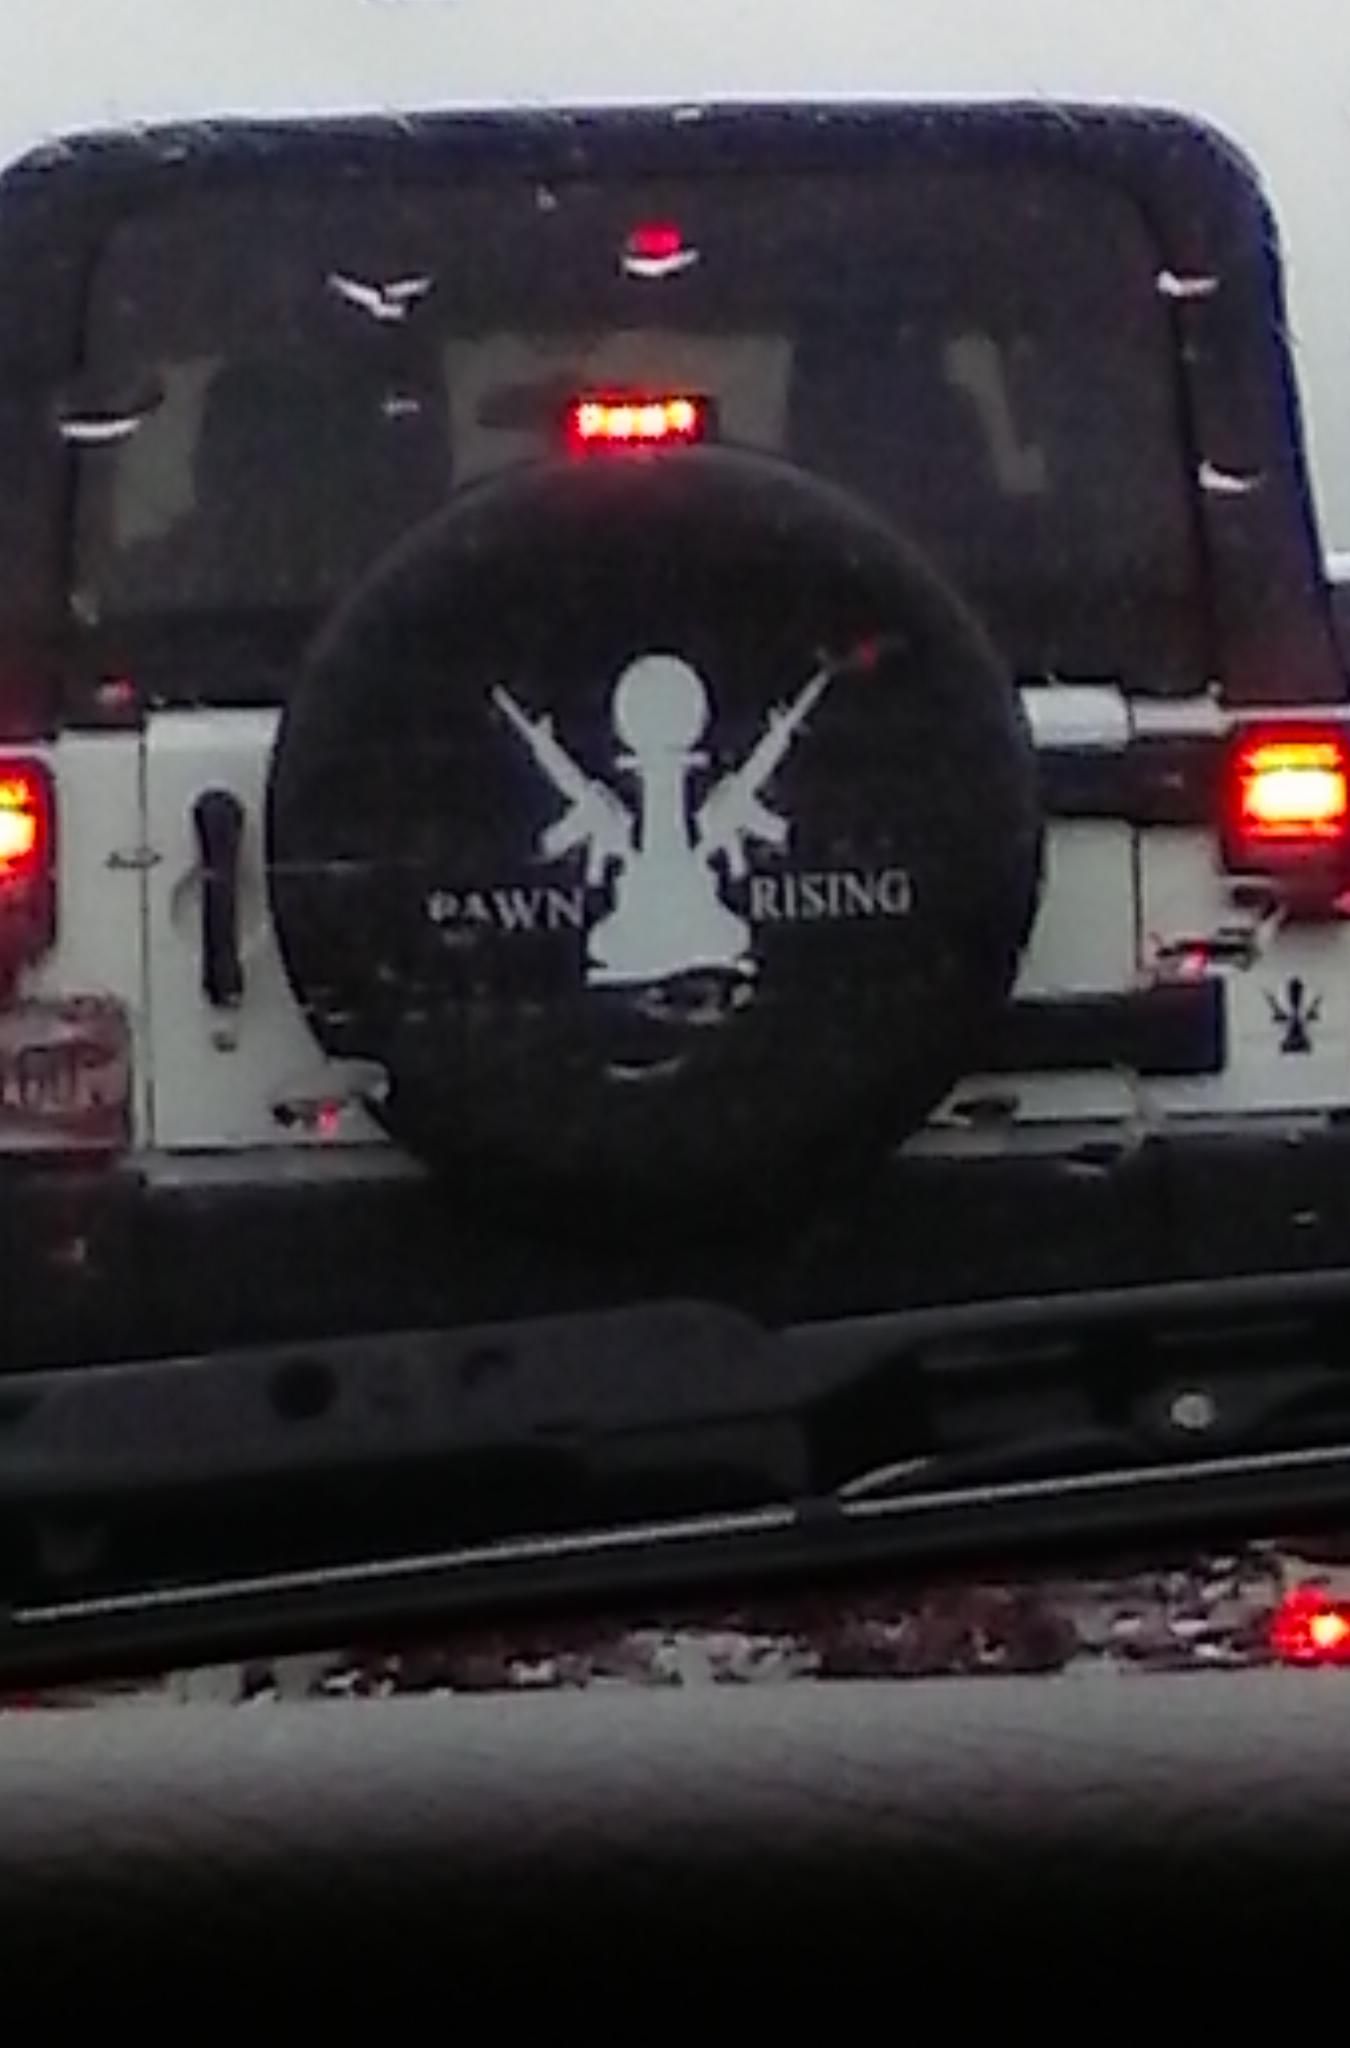 I know they meant "Pawn Rising" to be this badass logo with a chess pawn holding assault rifles, but all I see is Roger from American Dad in a NRA themed story B.